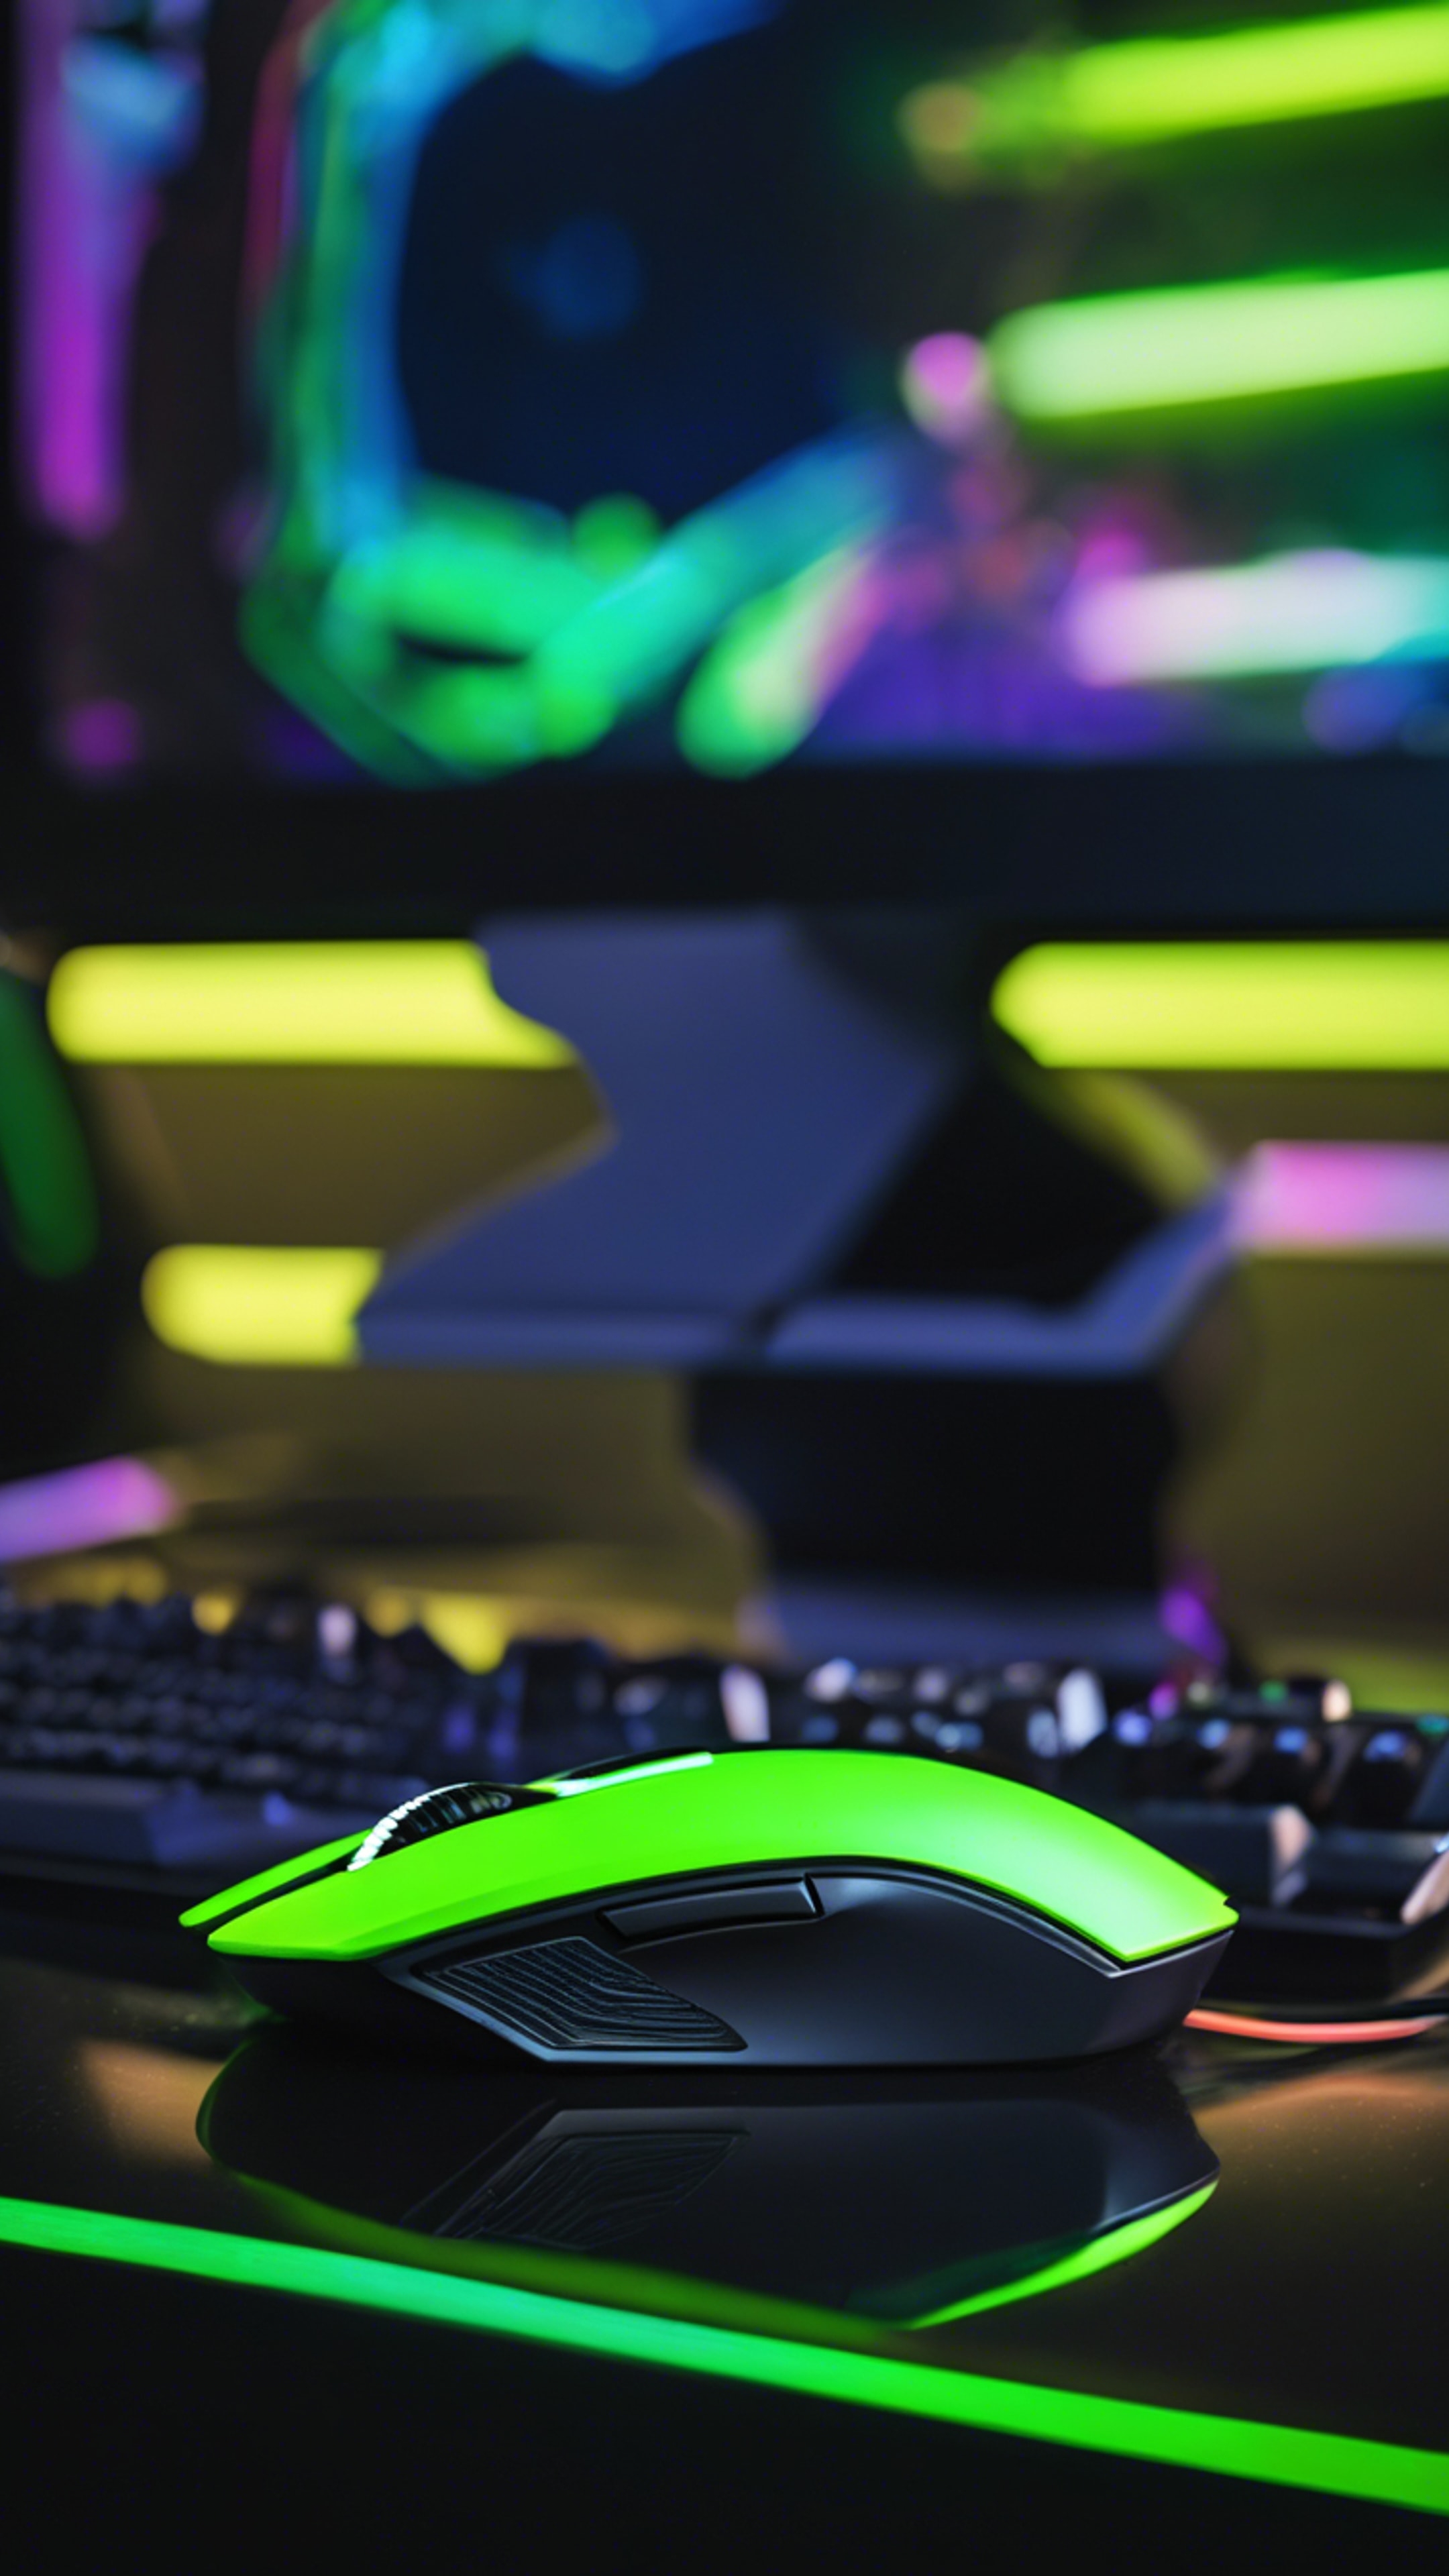 A cool neon green high-tech gaming mouse on a futuristic black desk setup. Tapet[6d2a2b9049aa4c81a995]